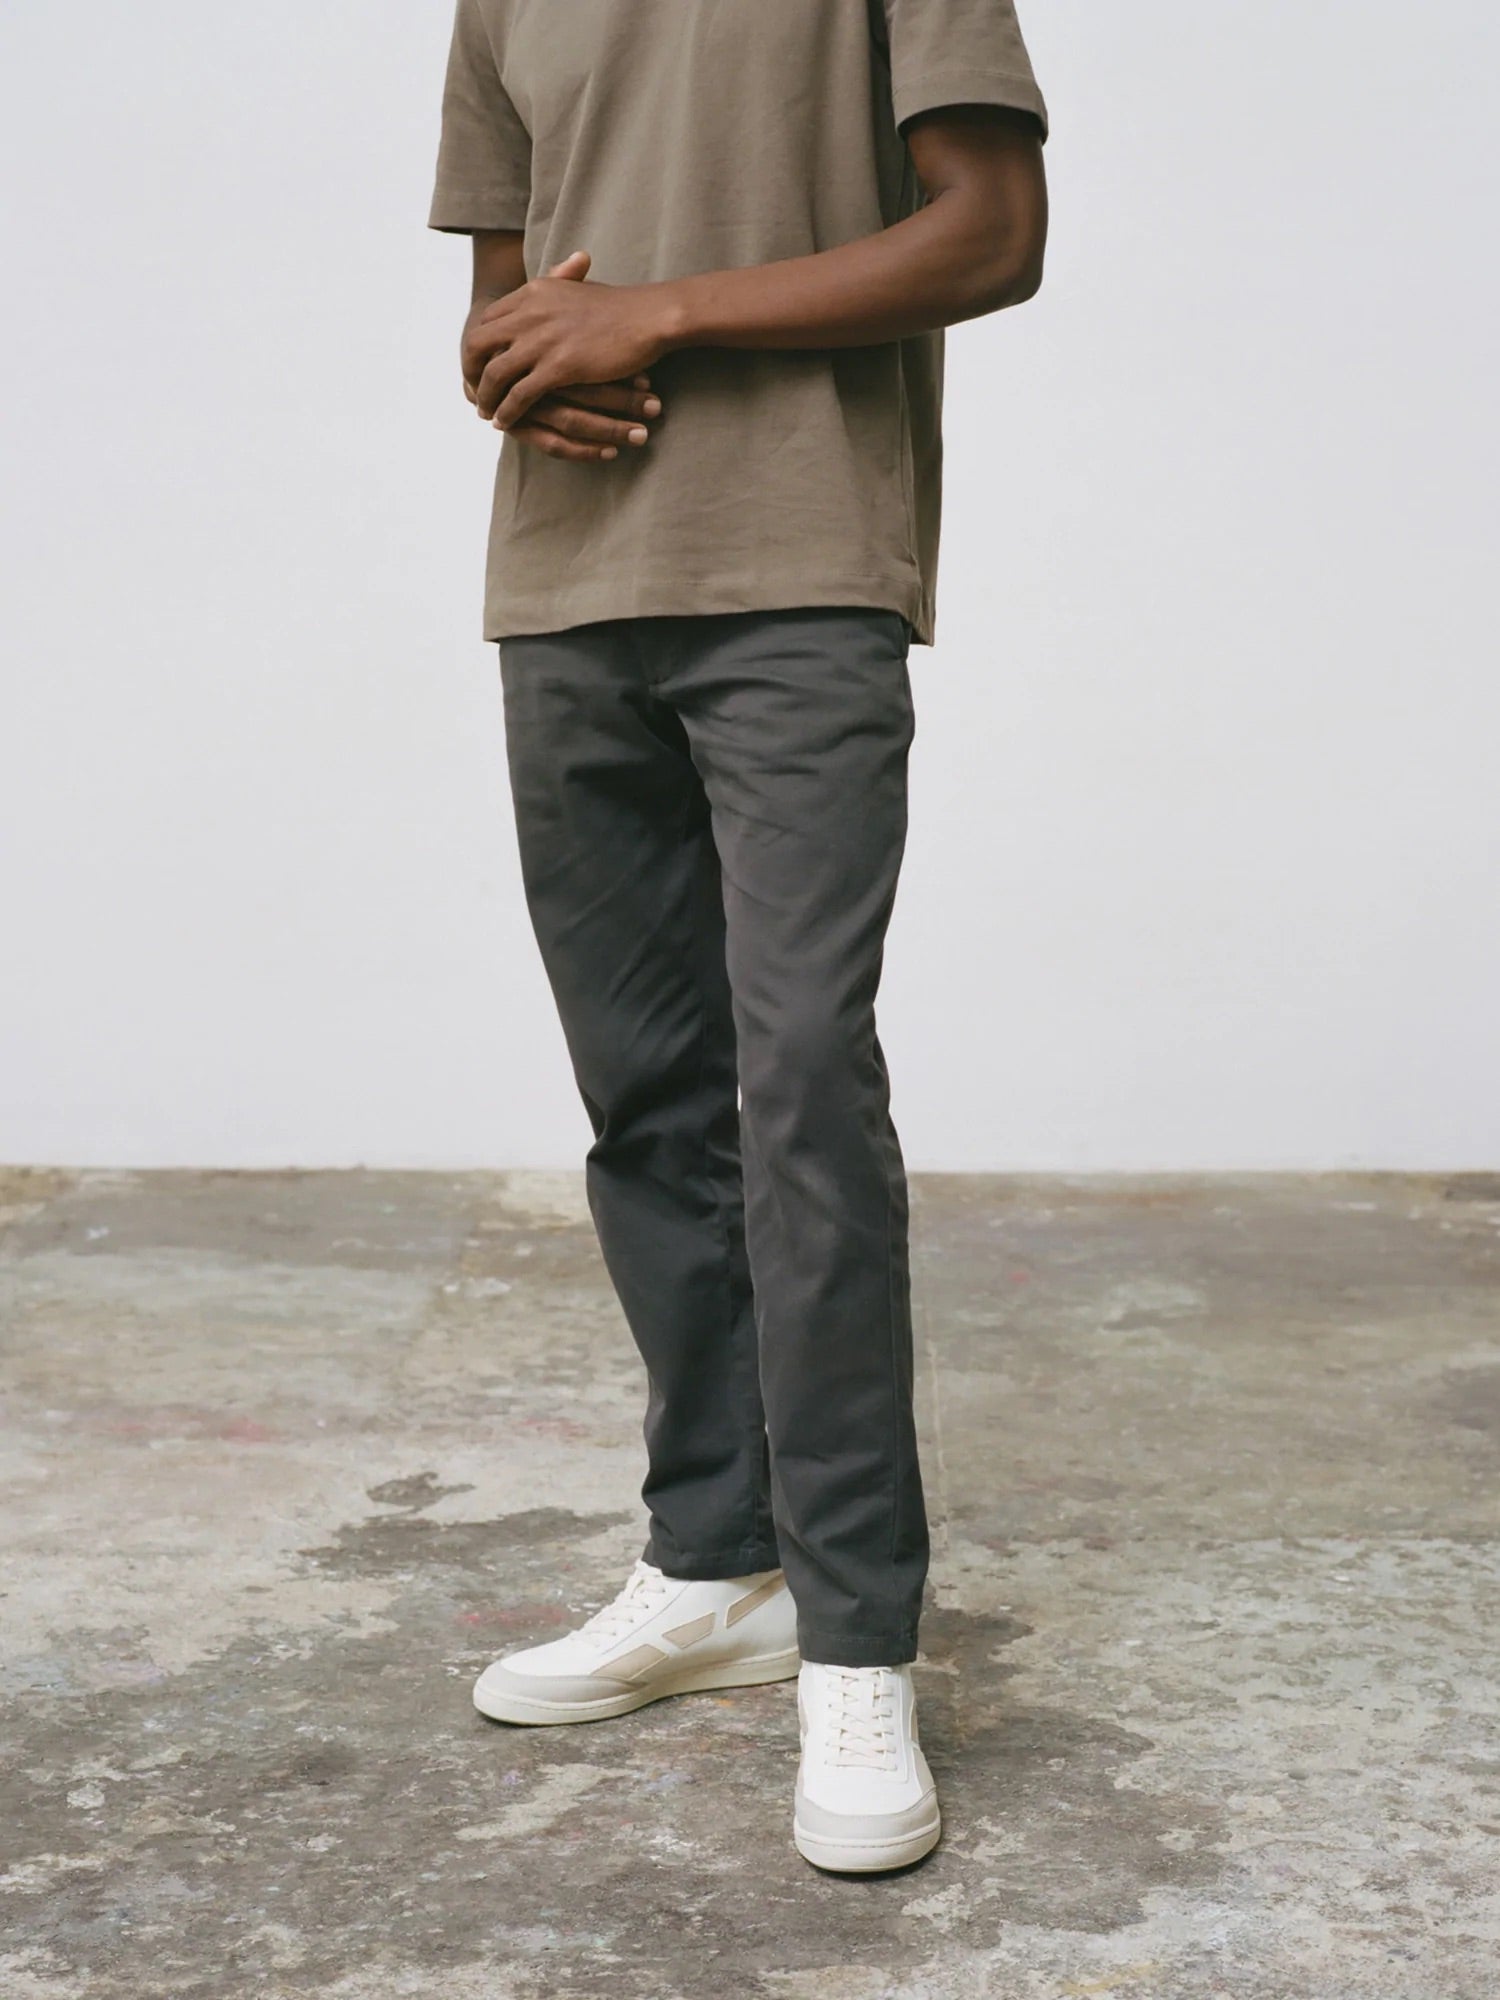 A man wearing a grey t-shirt and gray pants walks confidently, his SAYE Modelo '89 Hi Sneakers - Beige effortlessly blending comfort and style.